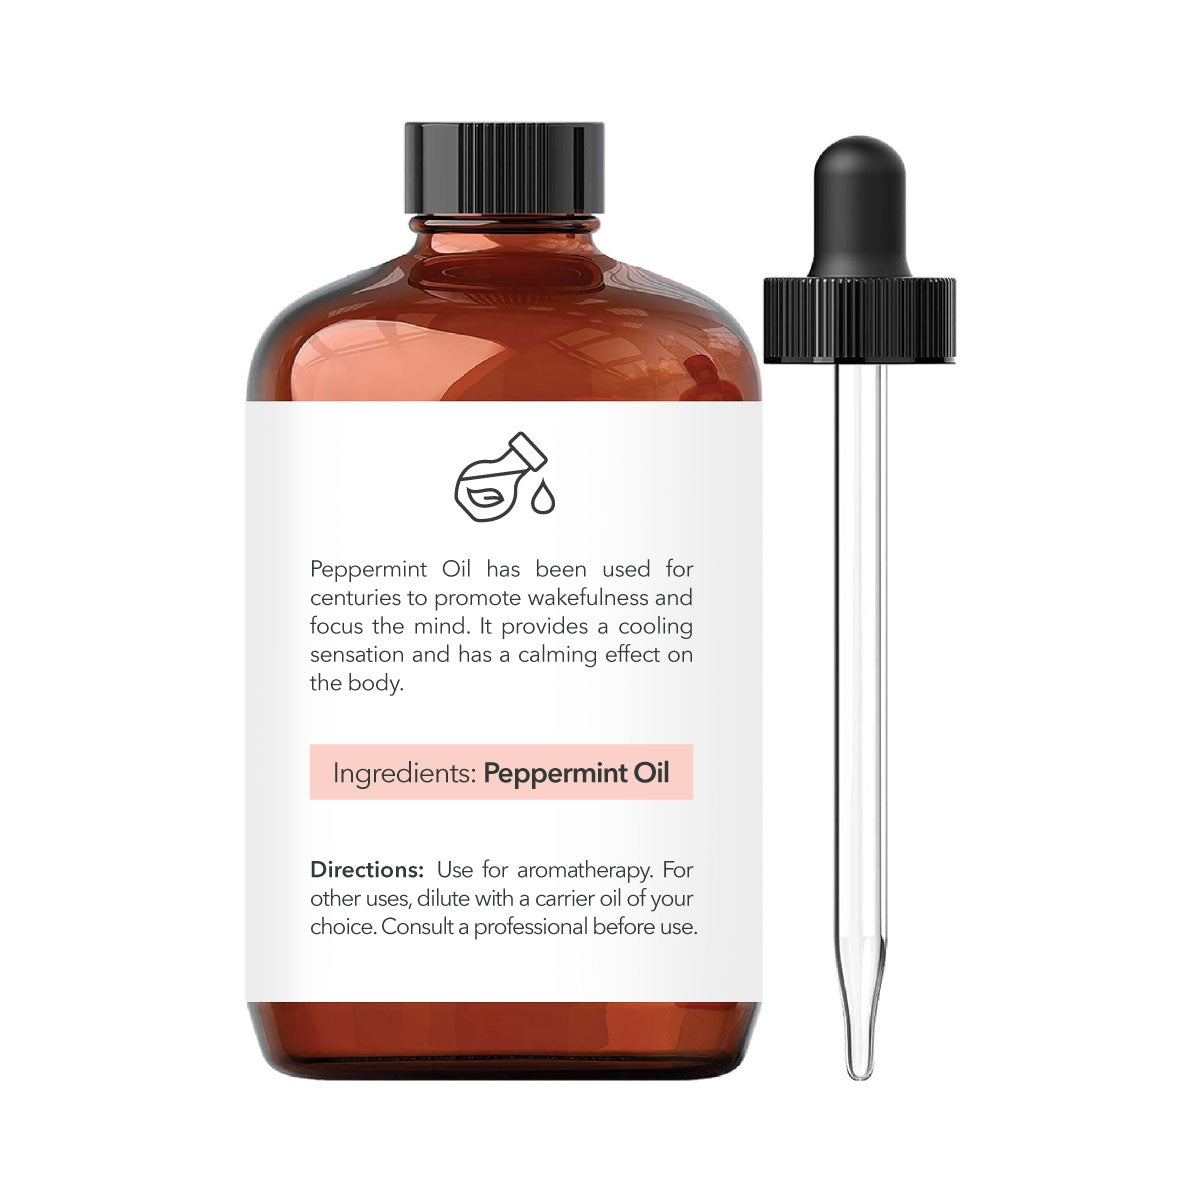 SHOPIFY_-BB-Peppermint-Essential-Oil-Main-Image-2.jpg